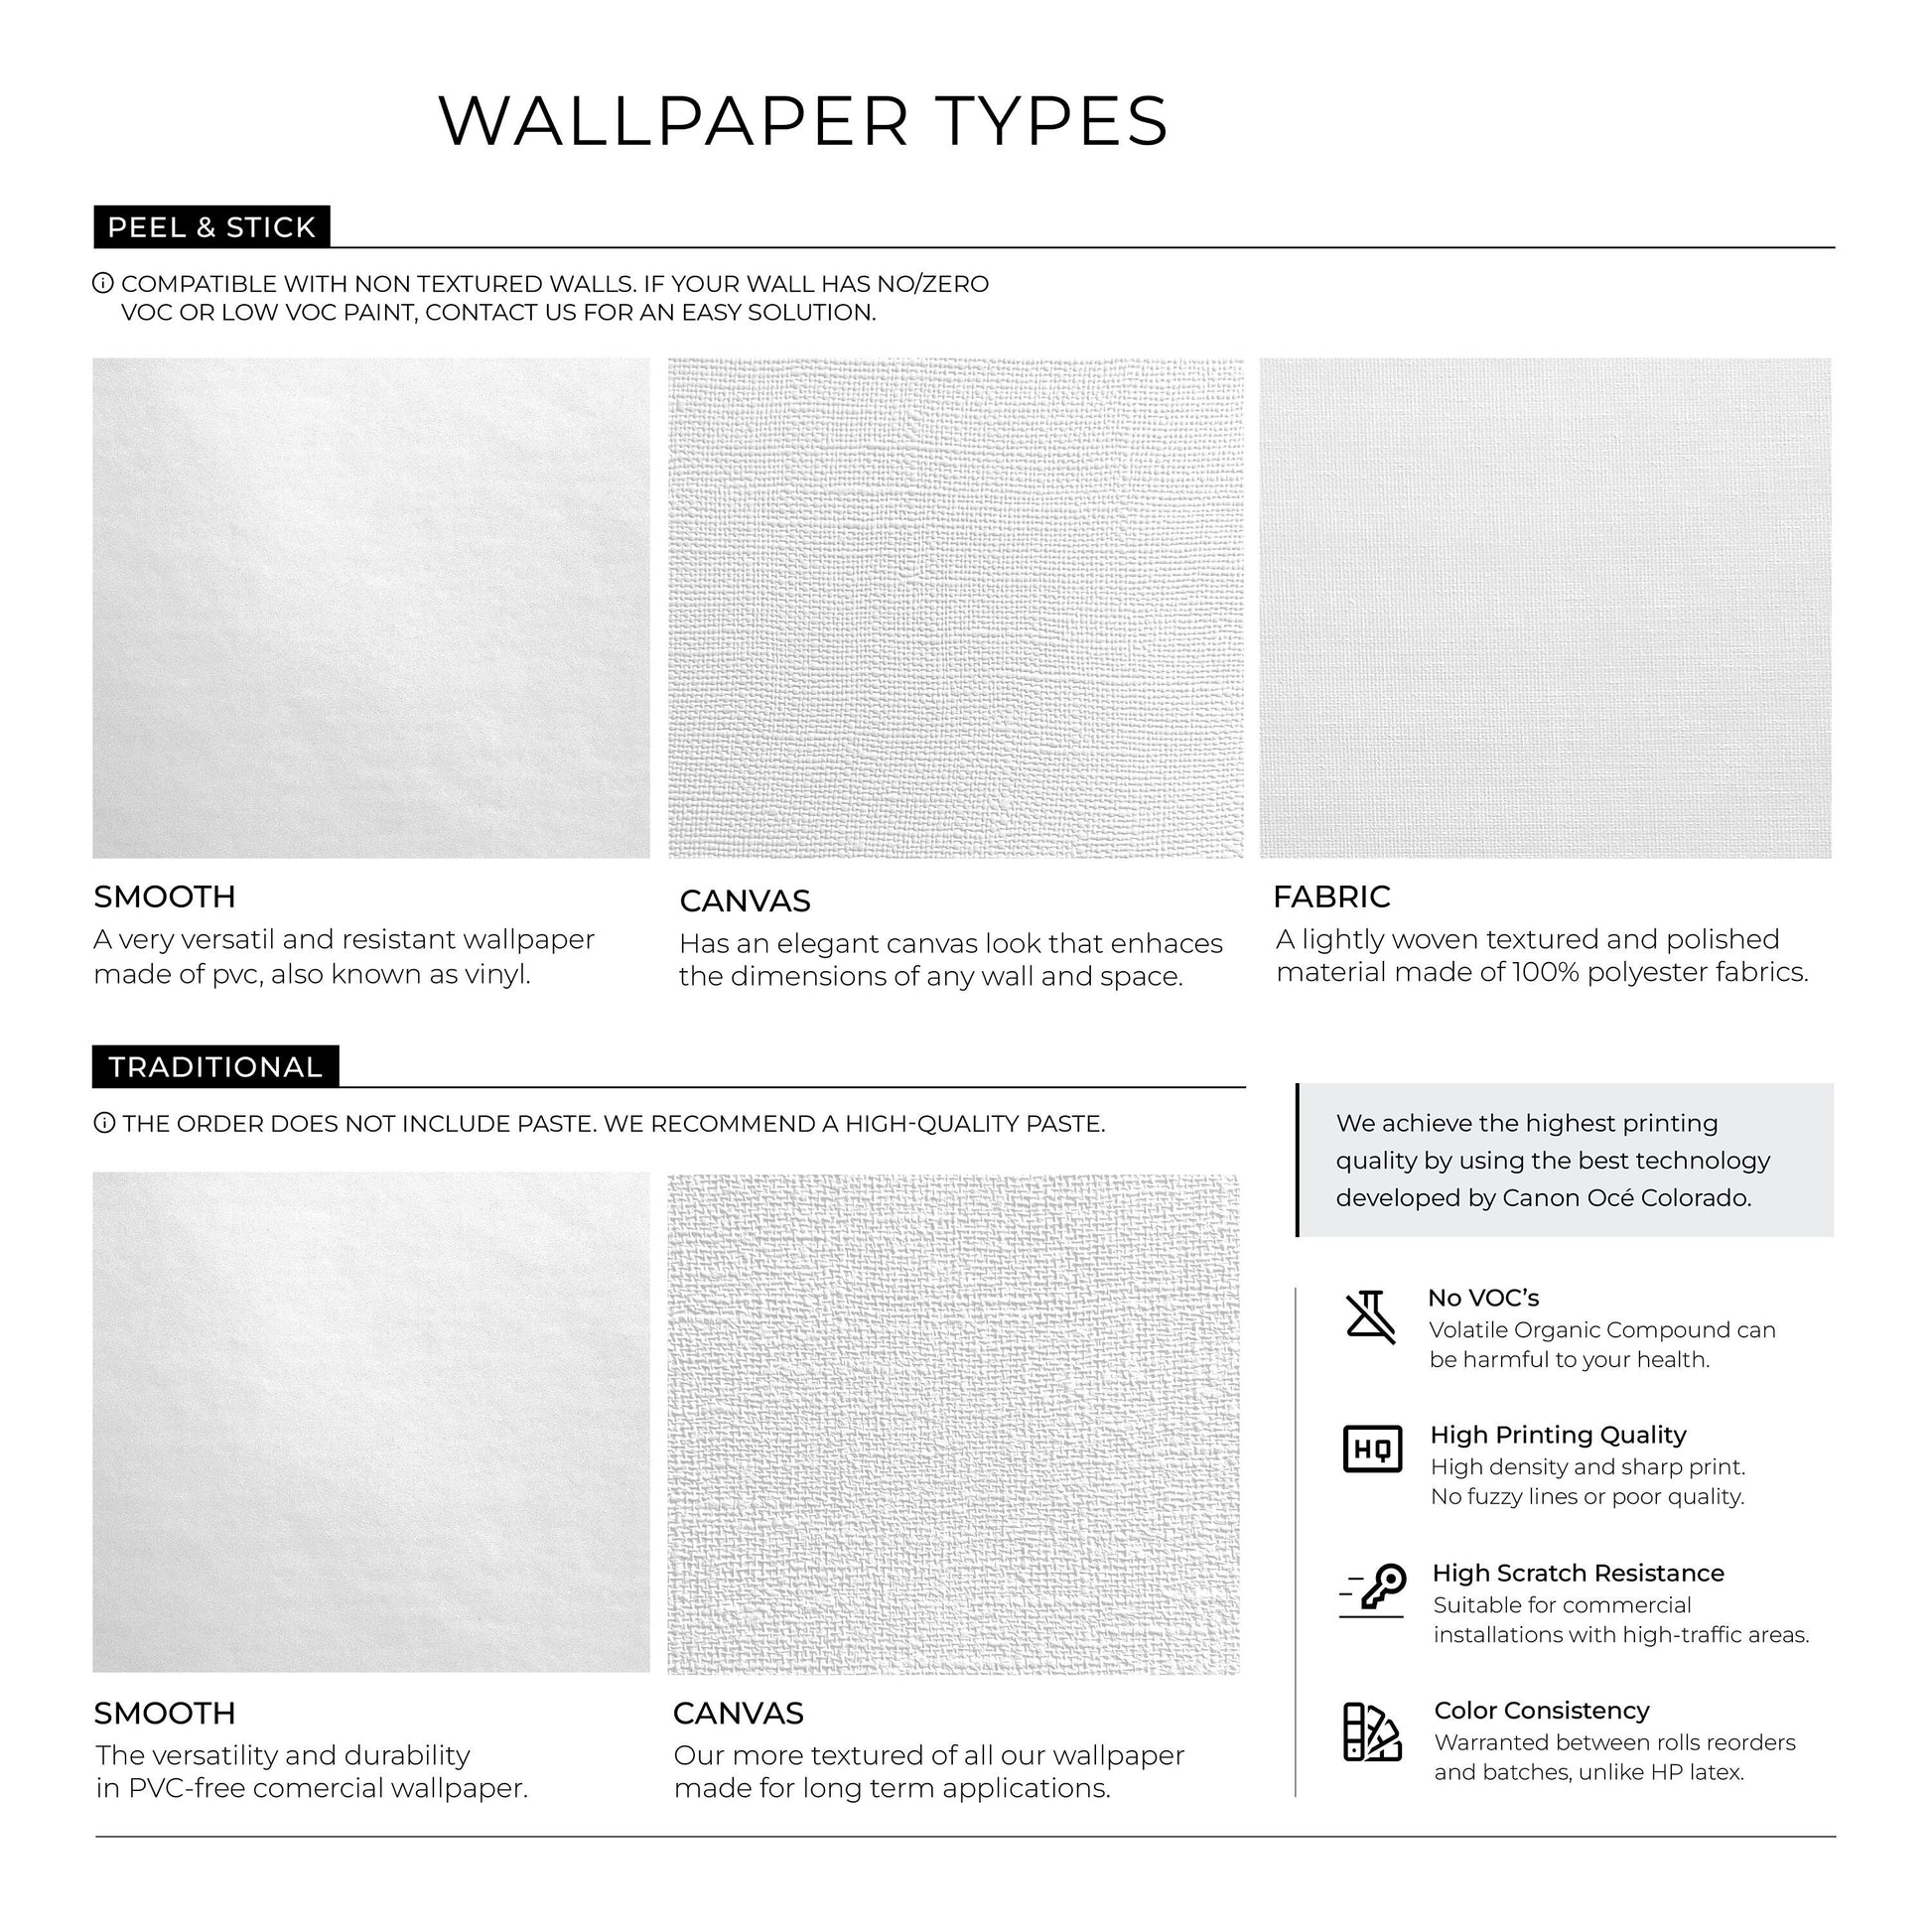 Wallpaper, Colorful Wallpapers, Peel and Stick Wallpaper, Fabric Wallpaper, Wall Paper Removable, Wallpaper - C252